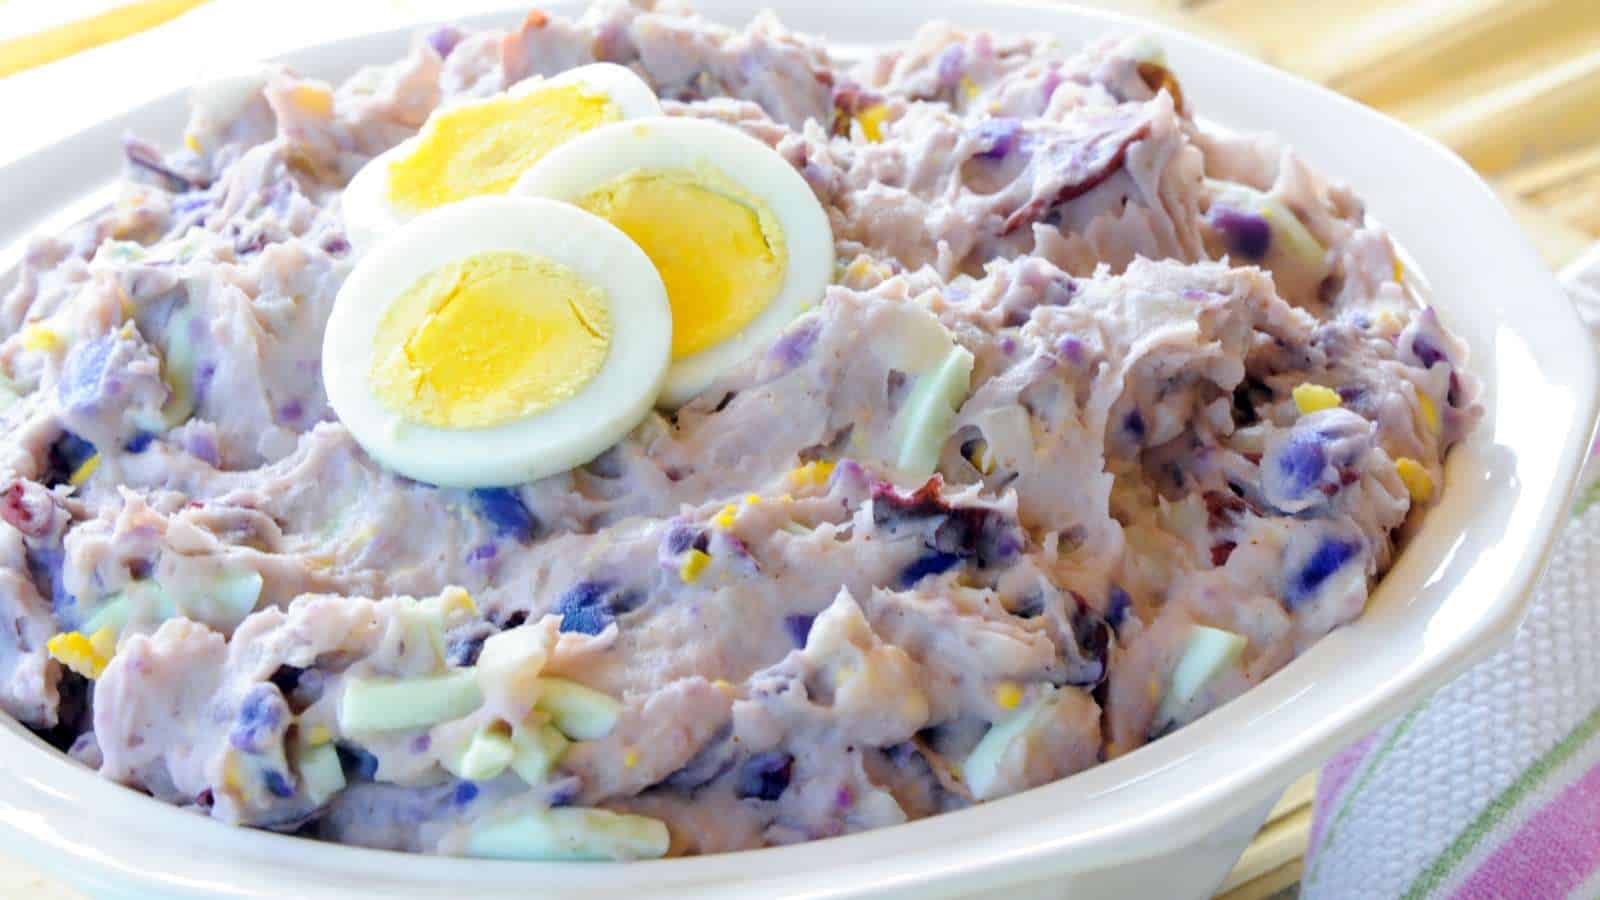 Bowl of purple potato salad with sliced hard-boiled-eggs on top.